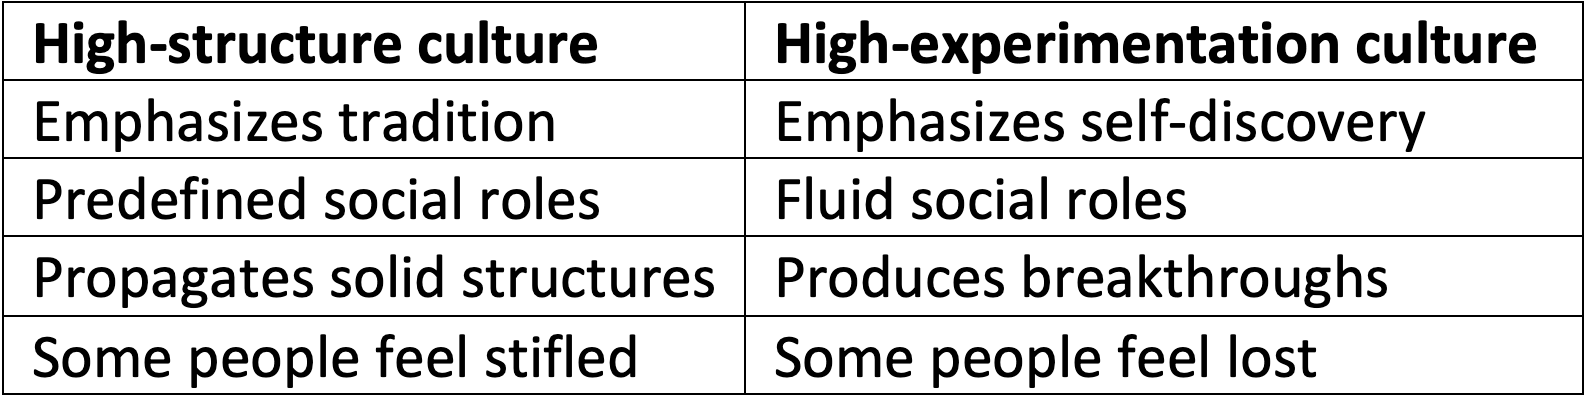 High-structure vs High-experimentation cultures